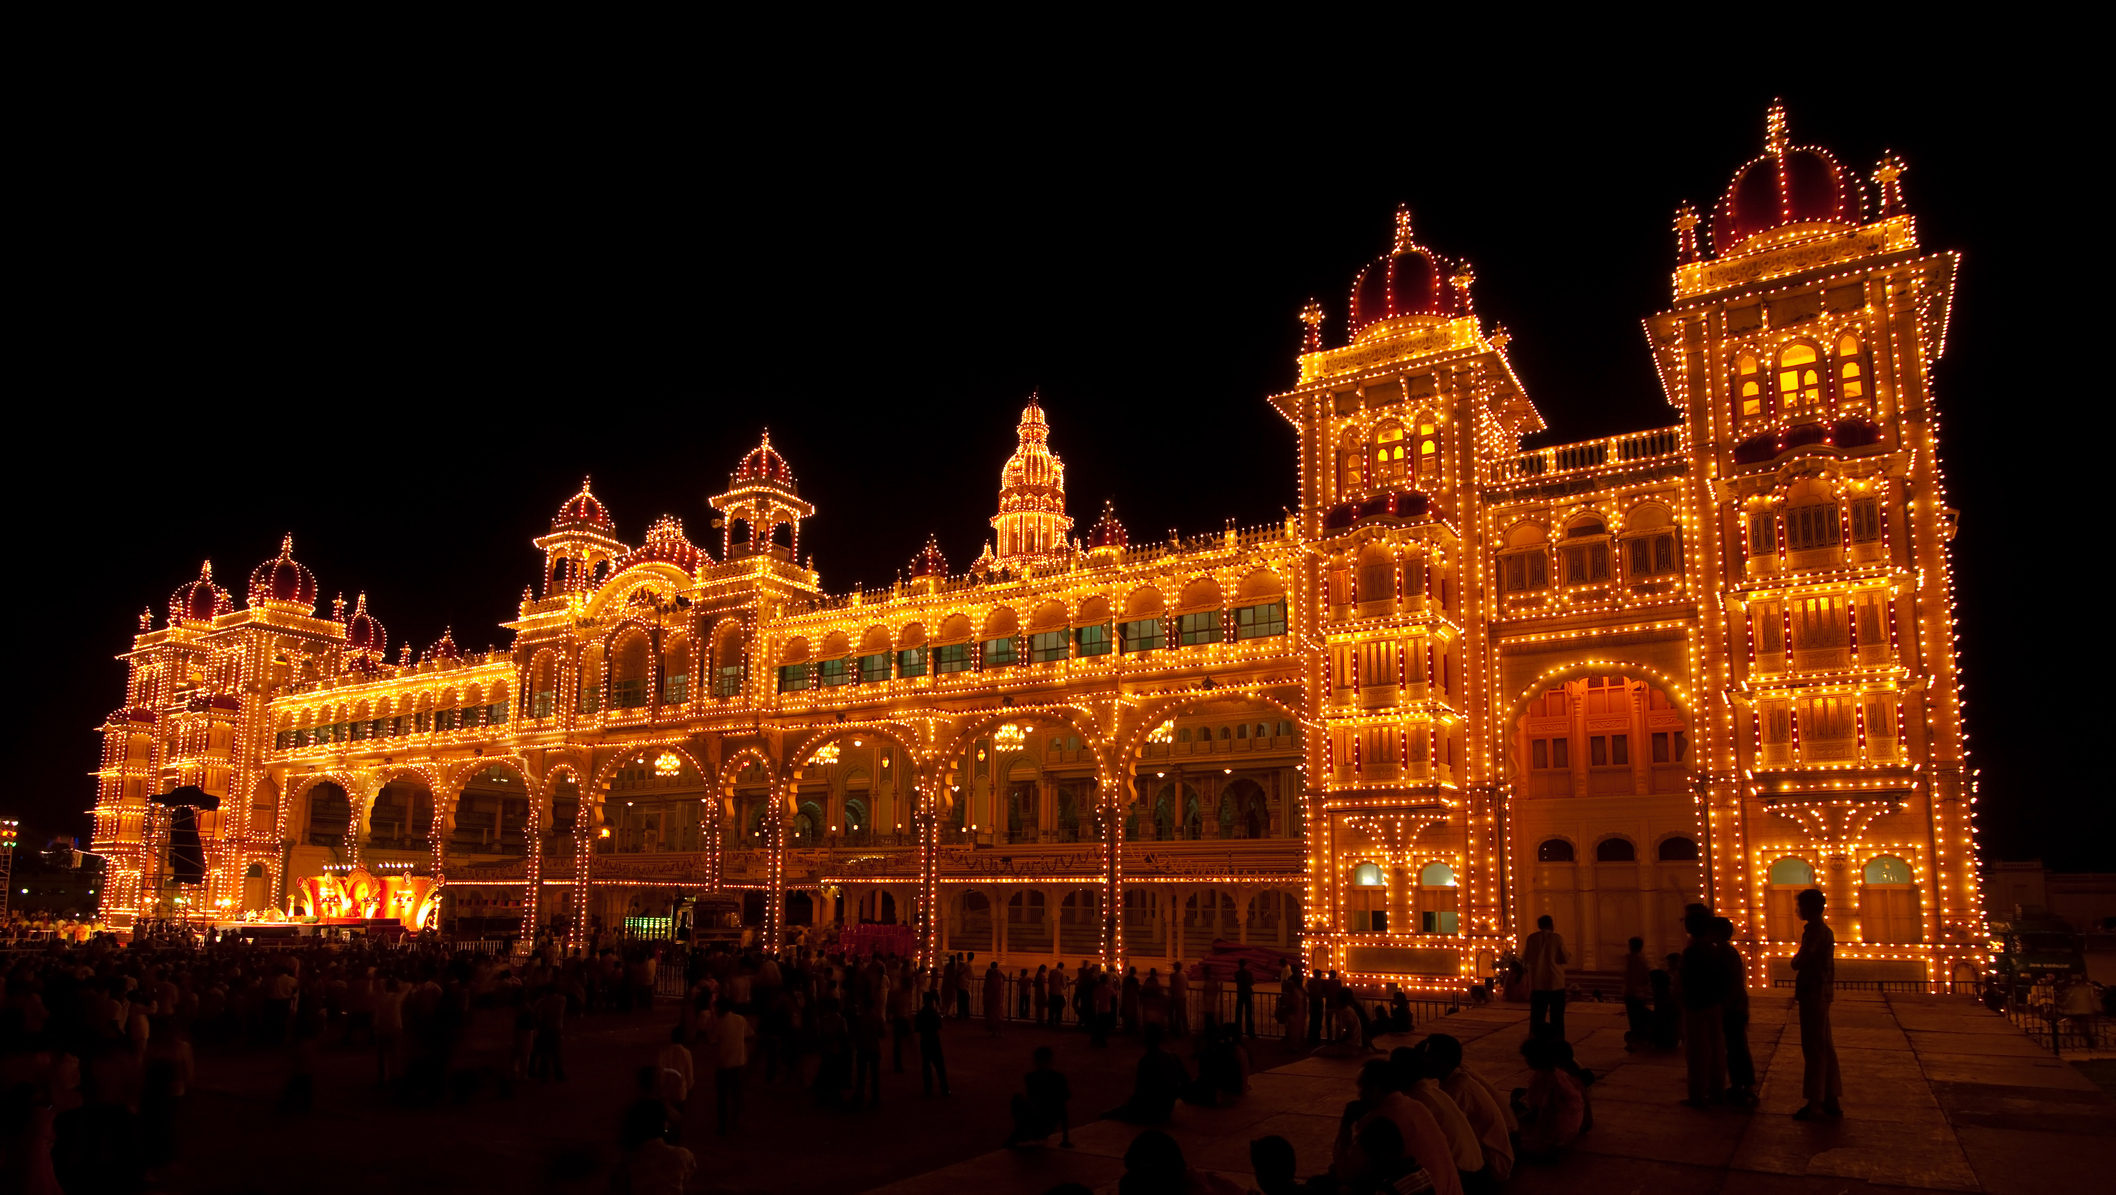 Experience extraordinary Indian sights like this view of the Mysore Palace lit up at night when you take a tailor-made holiday with Alfred&.